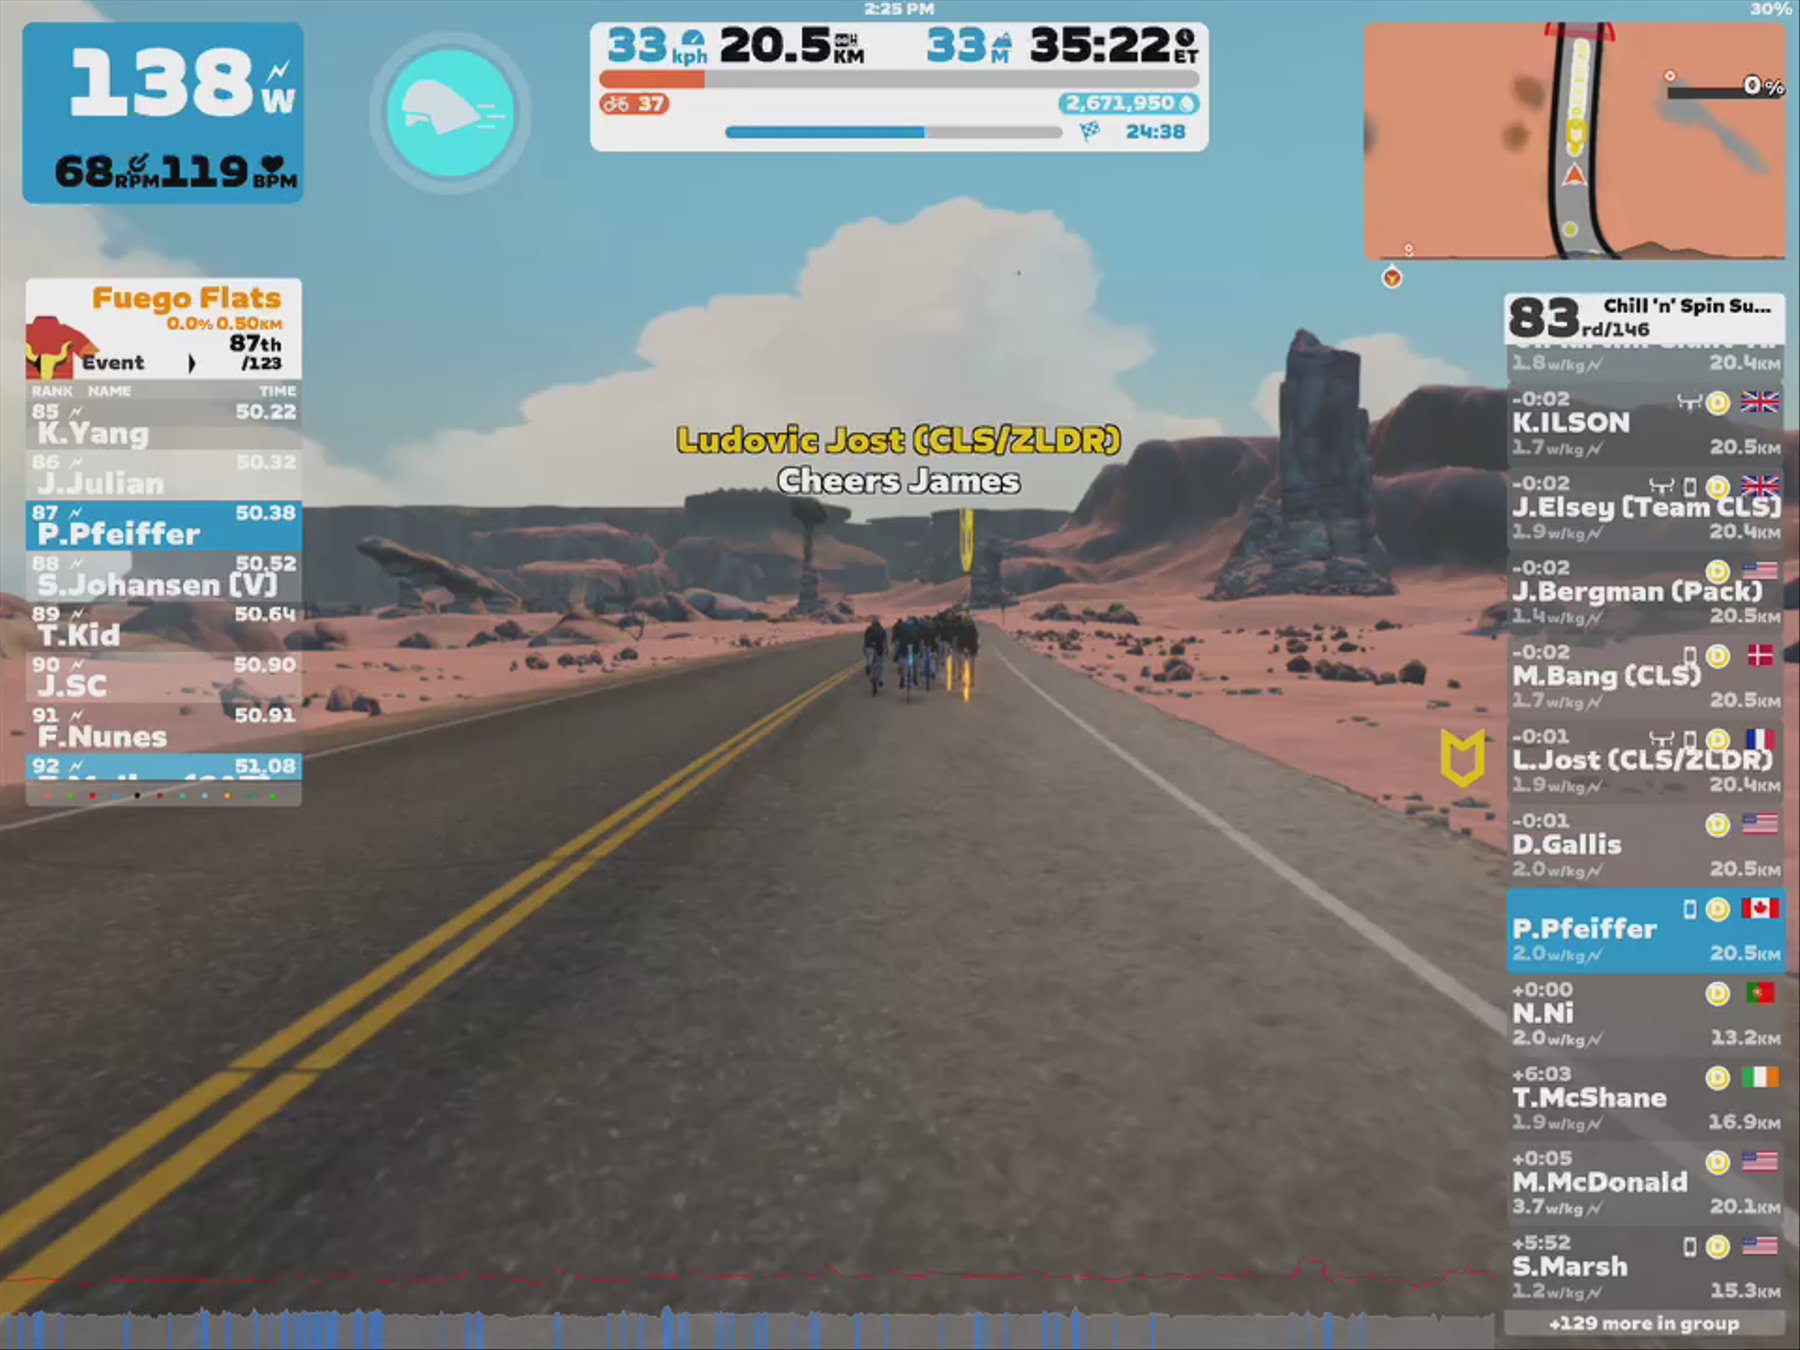 Zwift - Group Ride: Chill 'n' Spin Sunday Ride (D) on Tempus Fugit in Watopia